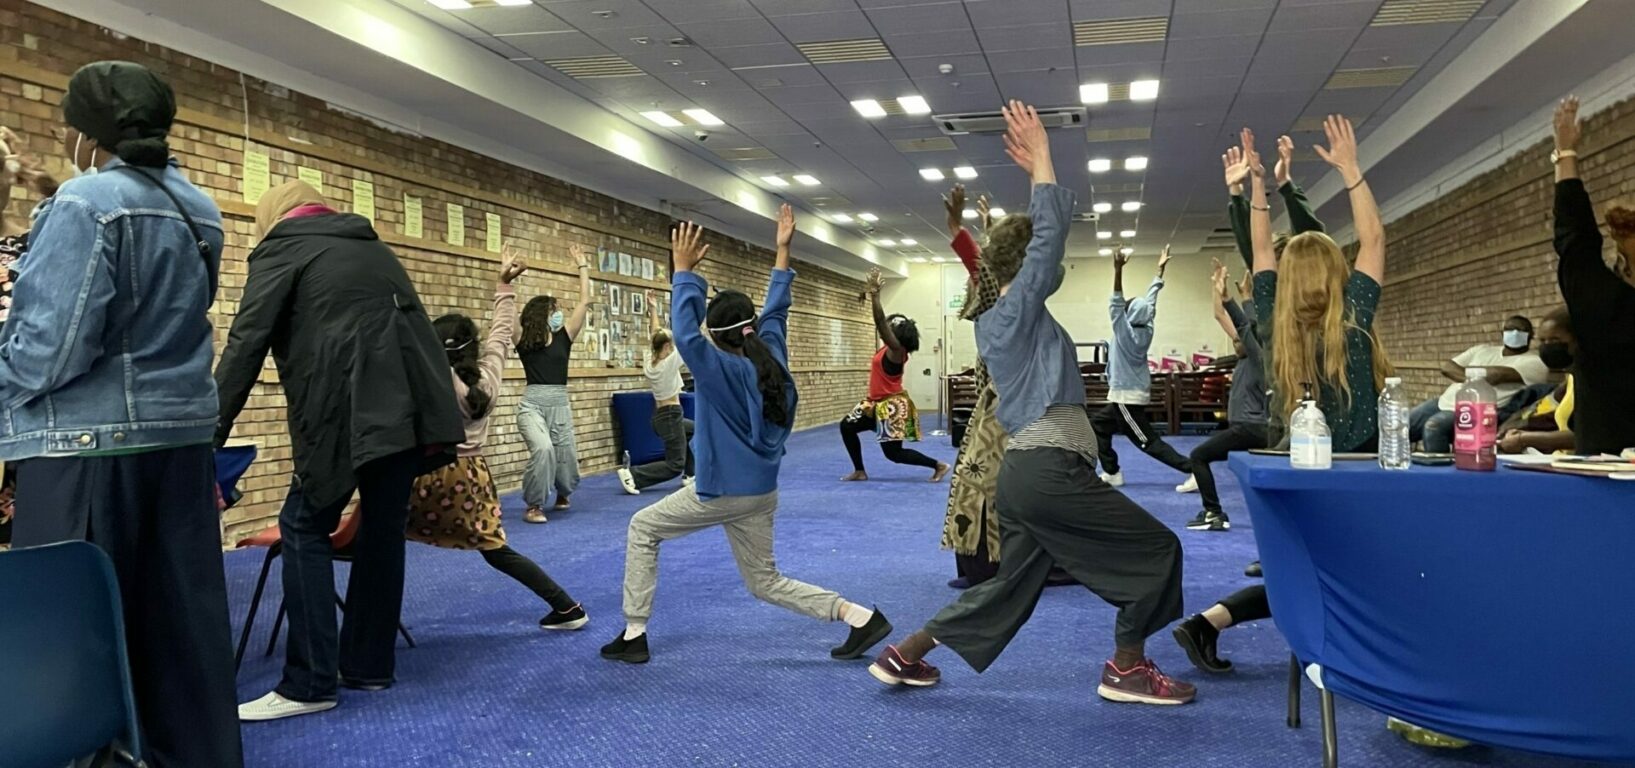 Group of adults and children learning a dance